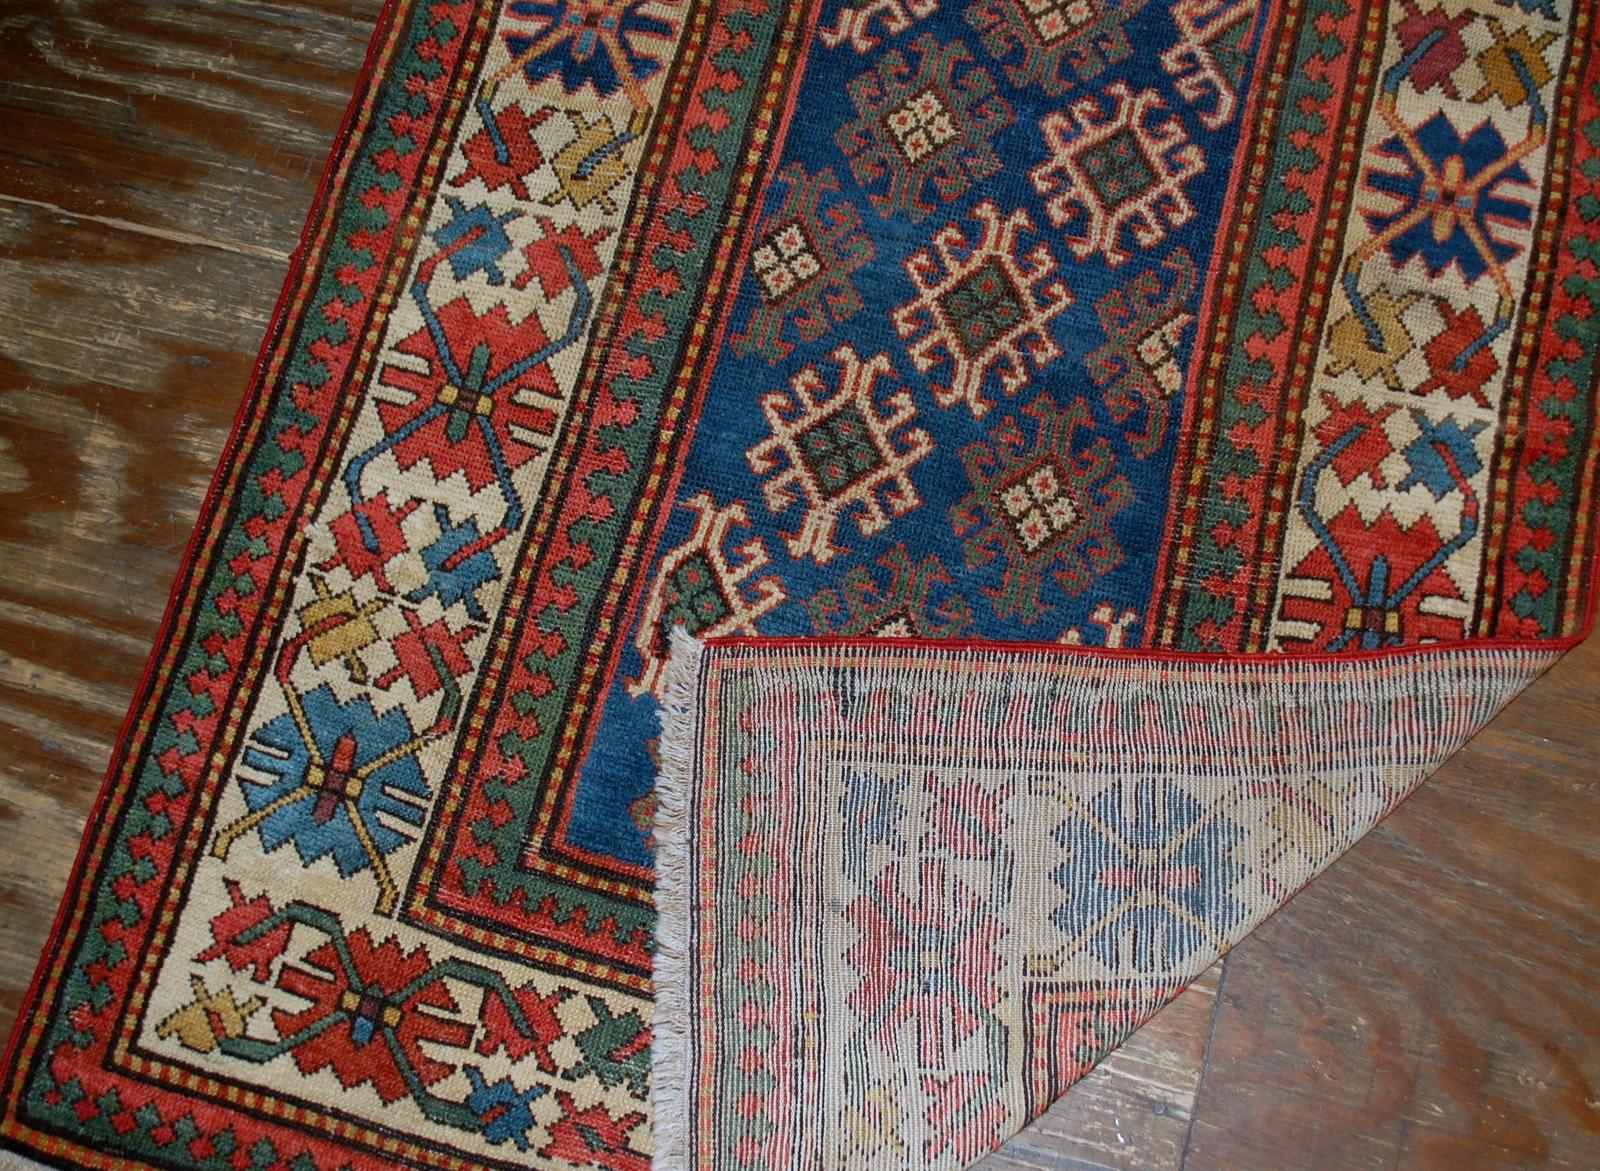 Antique handmade Caucasian Gendje rug in good condition. The rug is from the end of 19th century, made in Russia.

- Condition: good,

- circa 1880s,

- Size: 3.2' x 8' (97cm x 244cm),

- Material: wool,

- Country of origin: Russia,

-